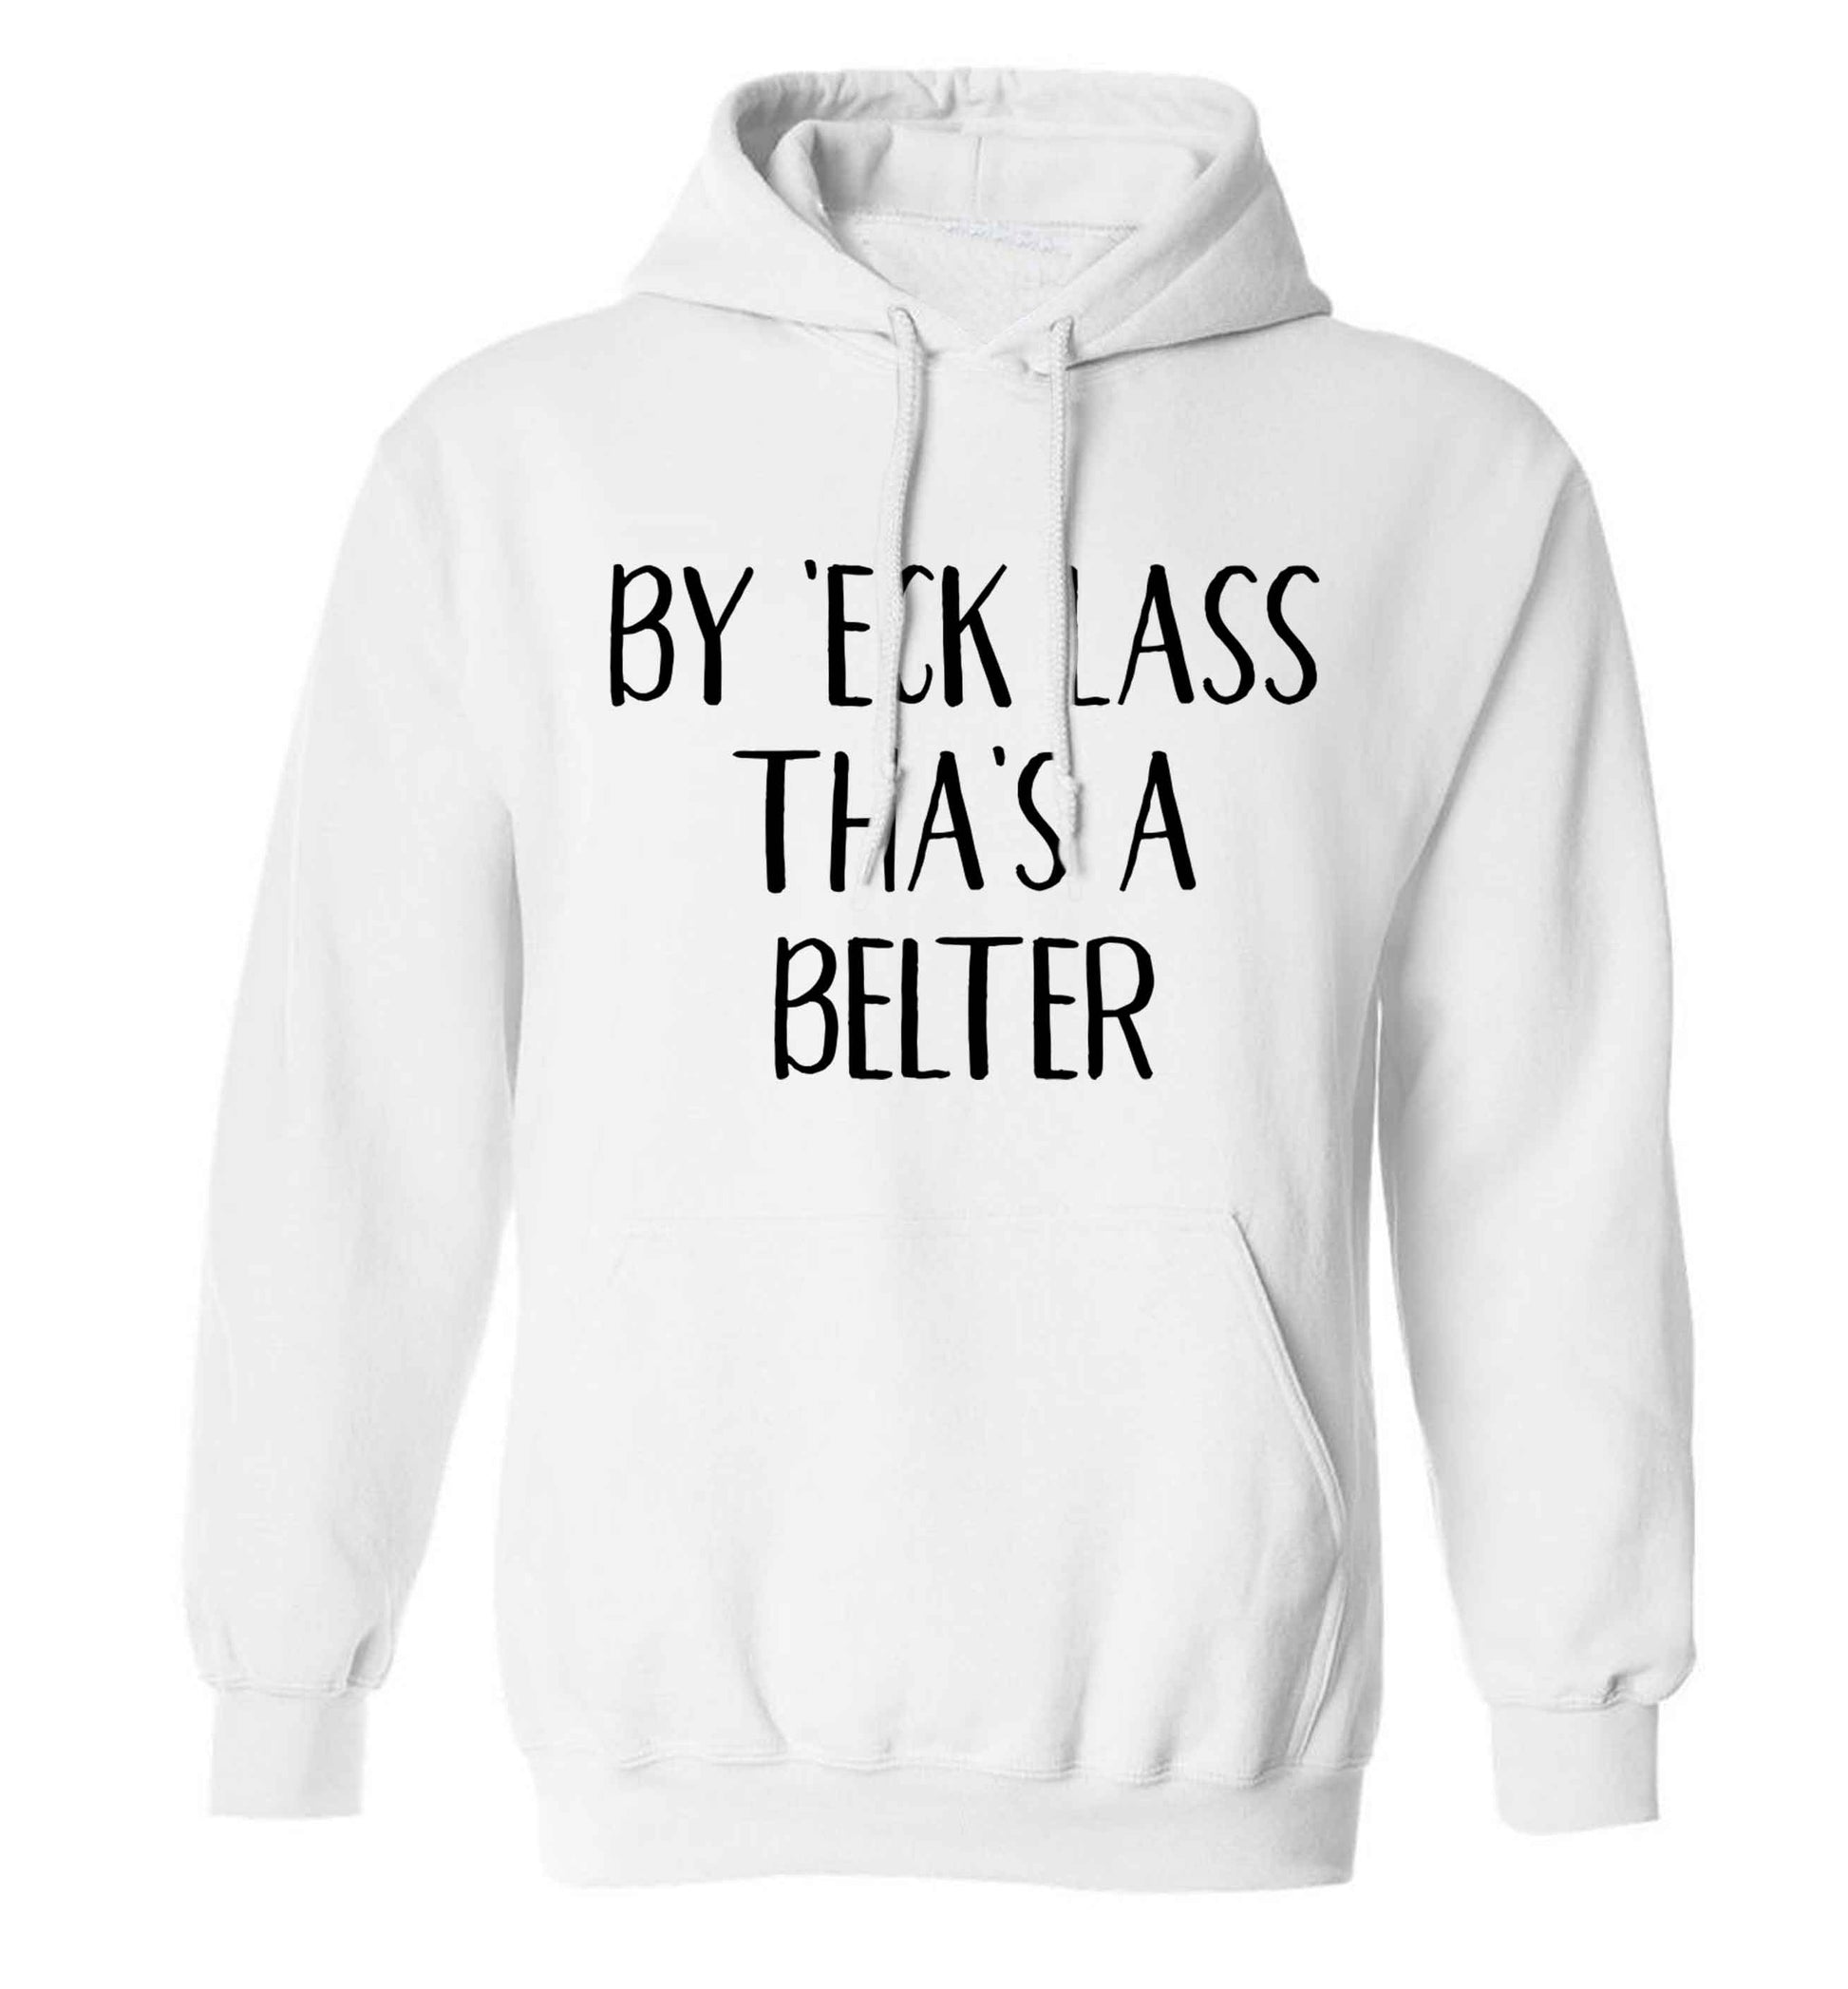 Be 'eck lass tha's a belter adults unisex white hoodie 2XL